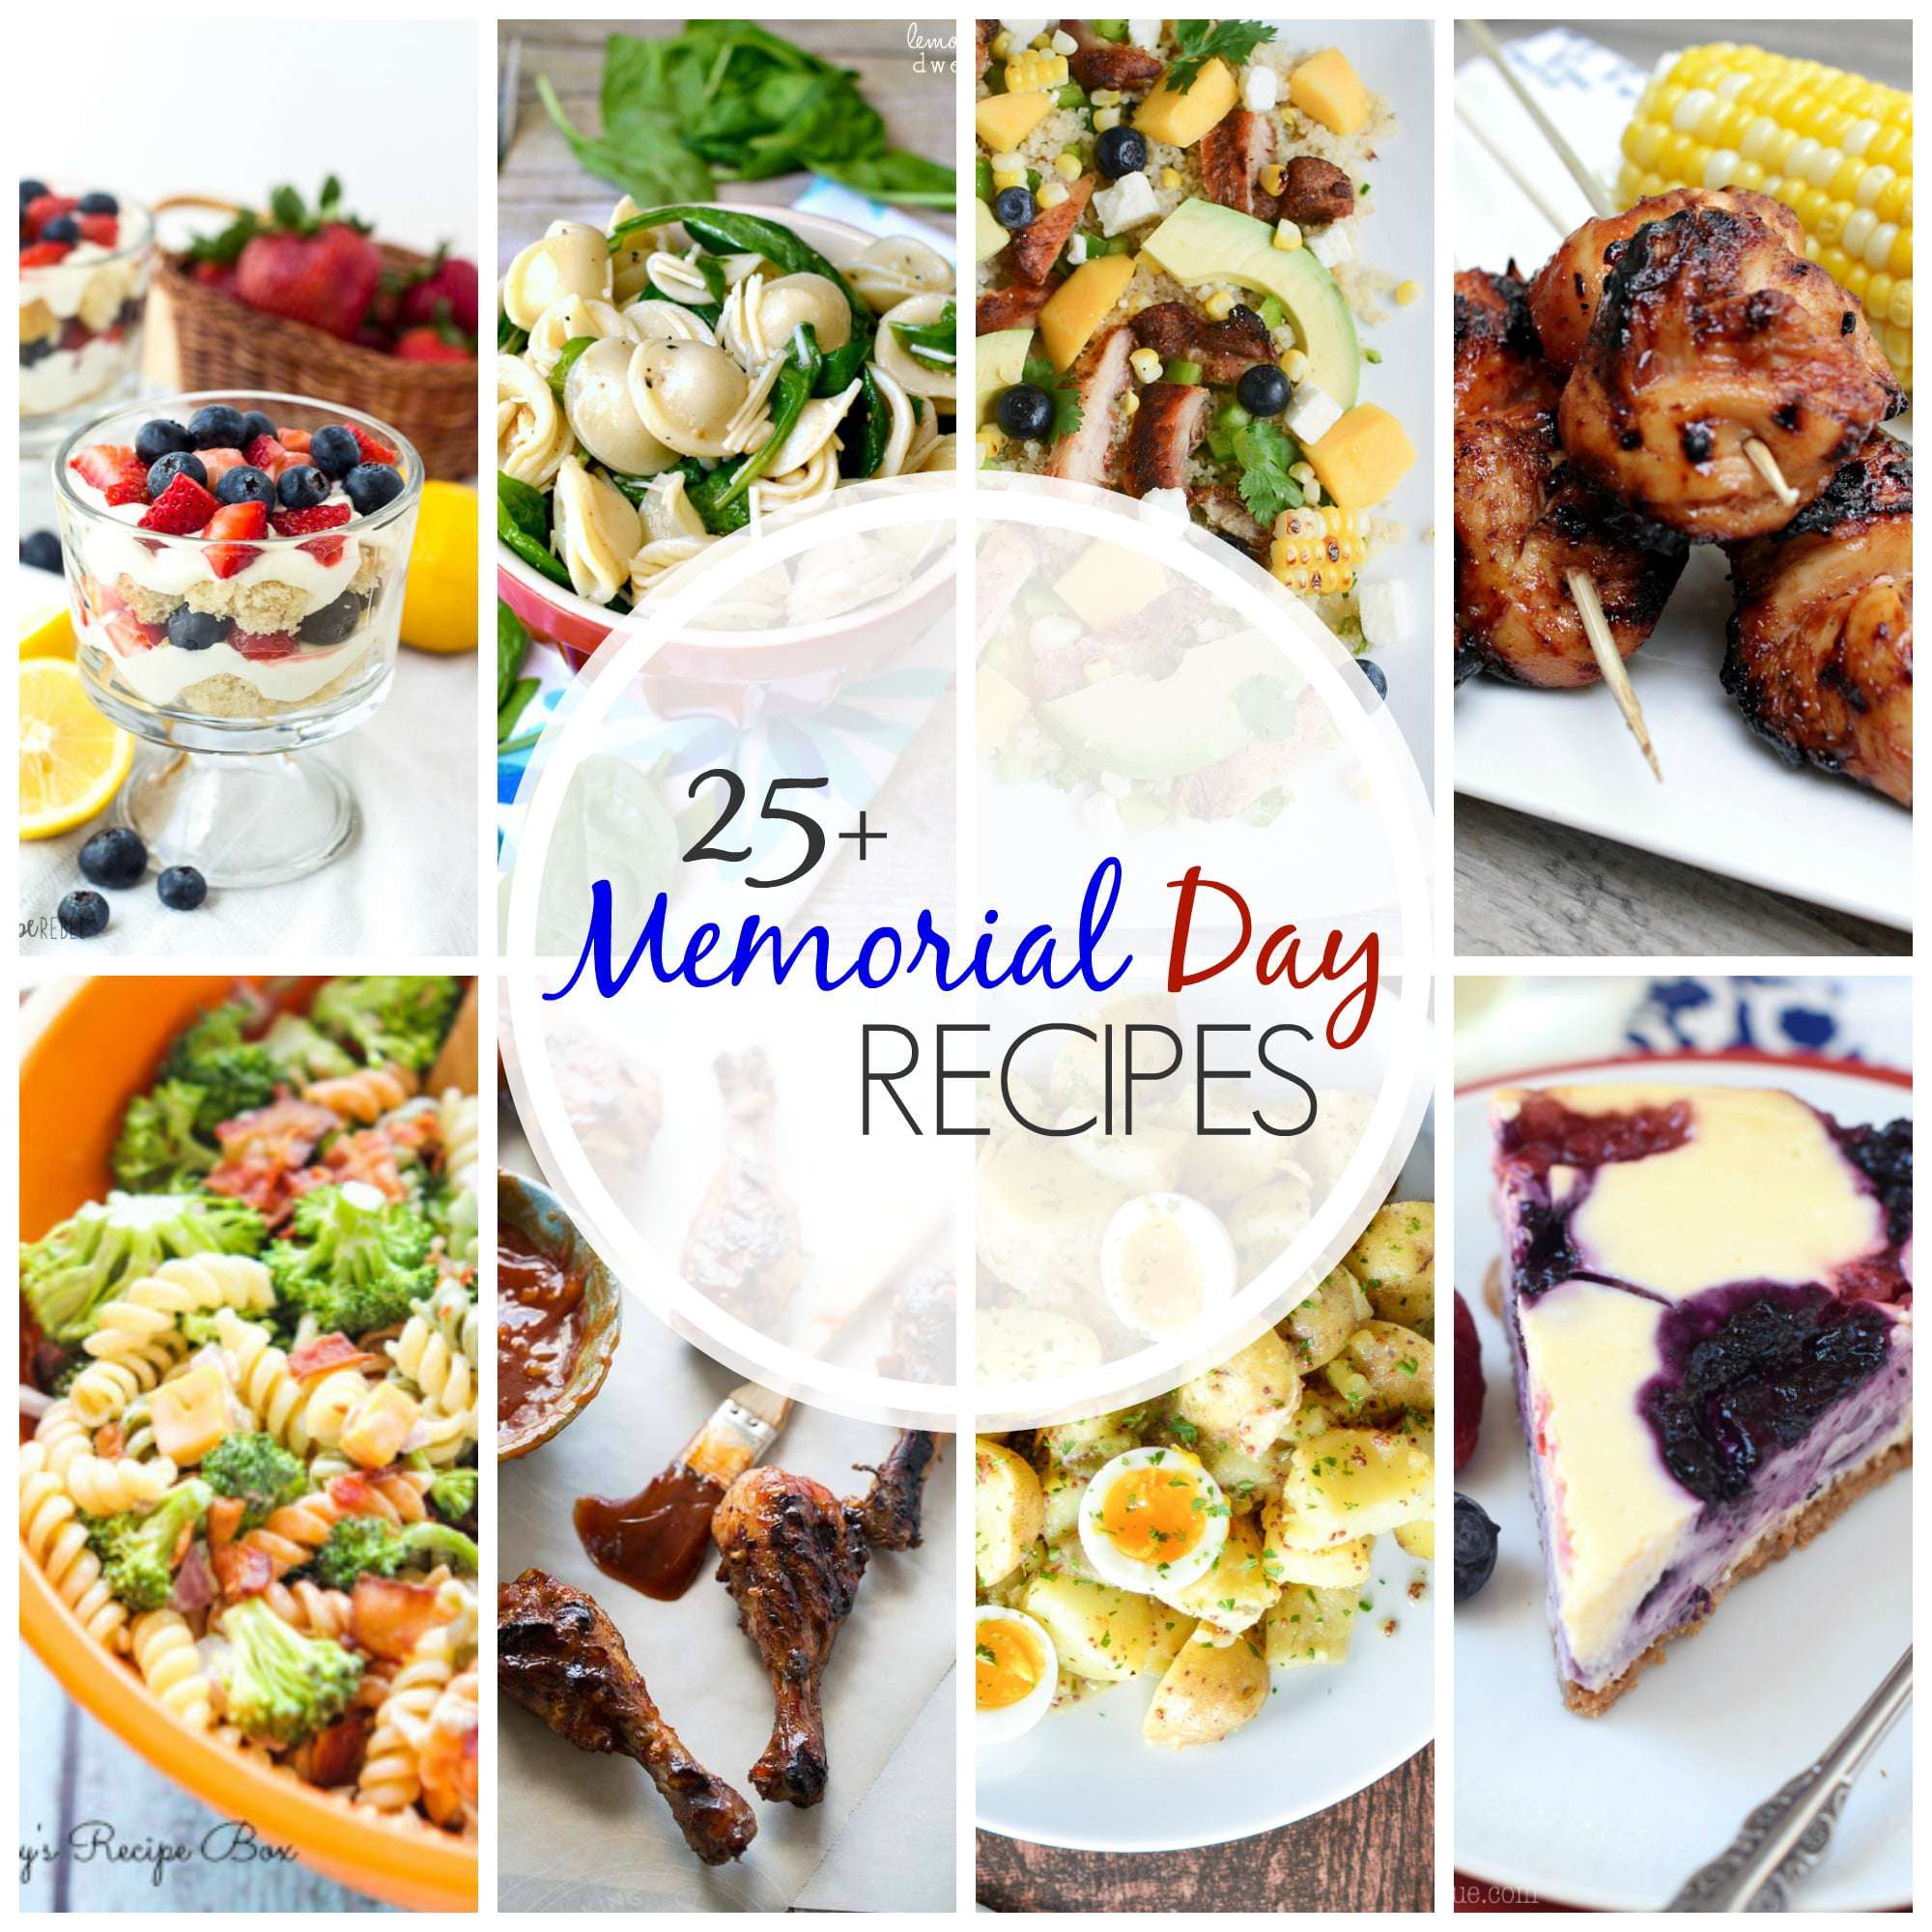 25+ Memorial day recipes that will get your summer started right!